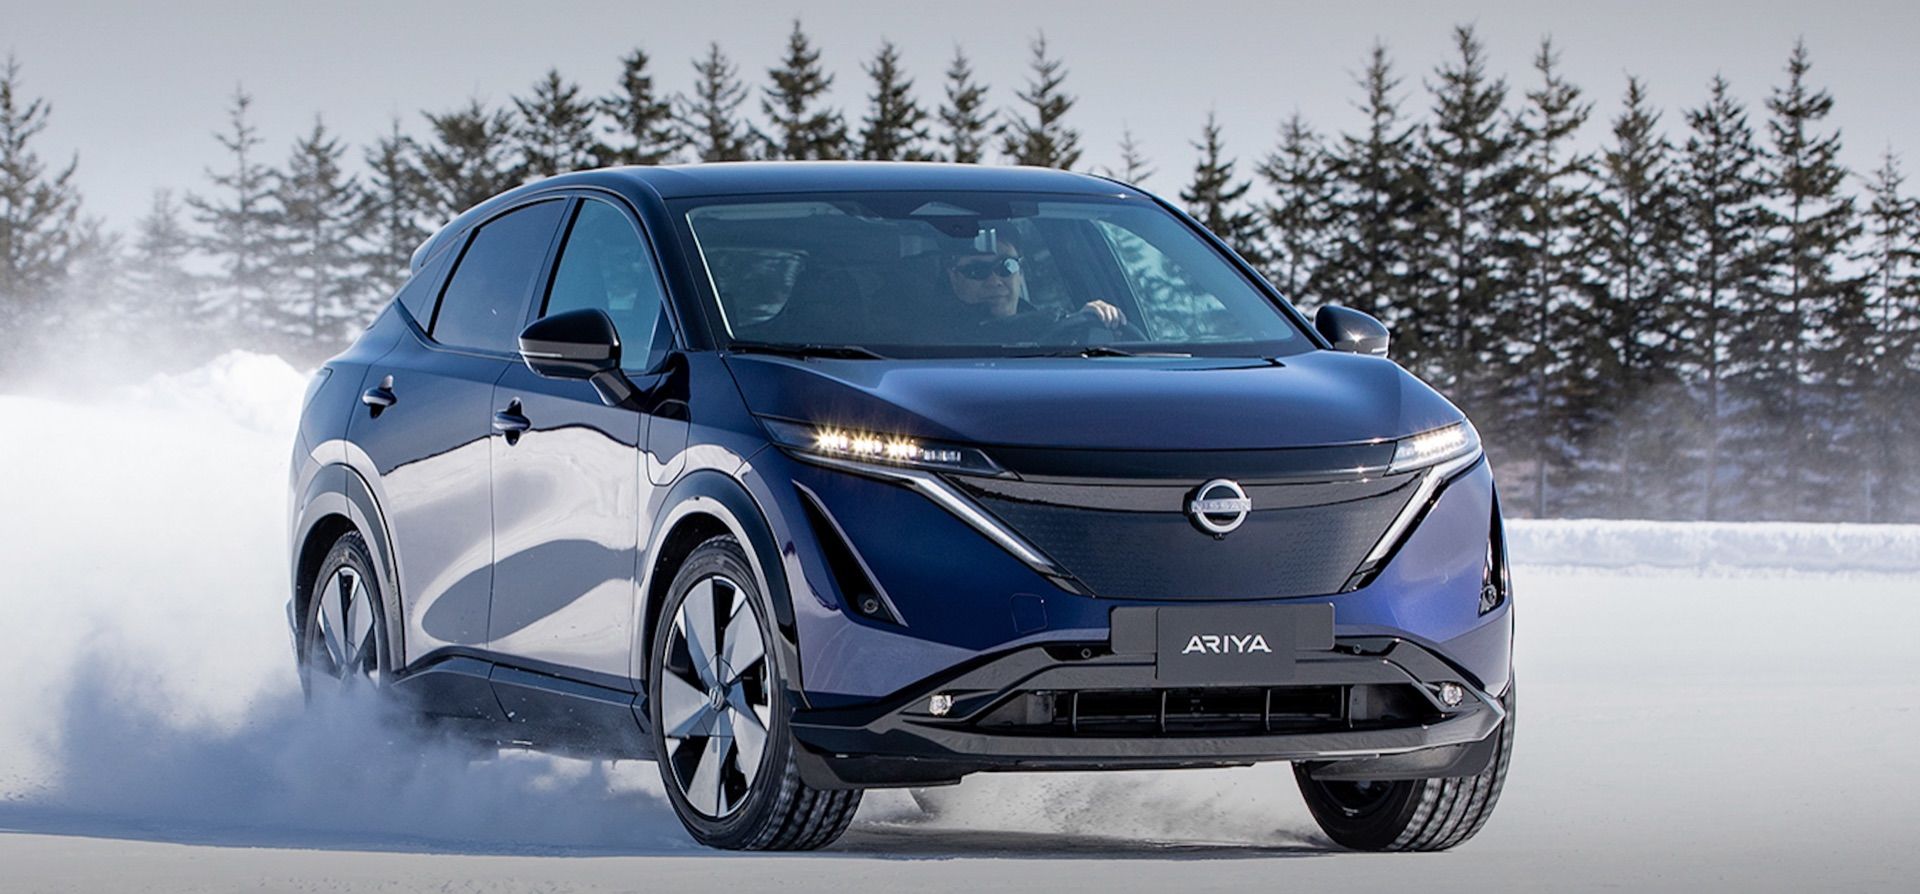 Will The Nissan Ariya Be Good In The Snow?